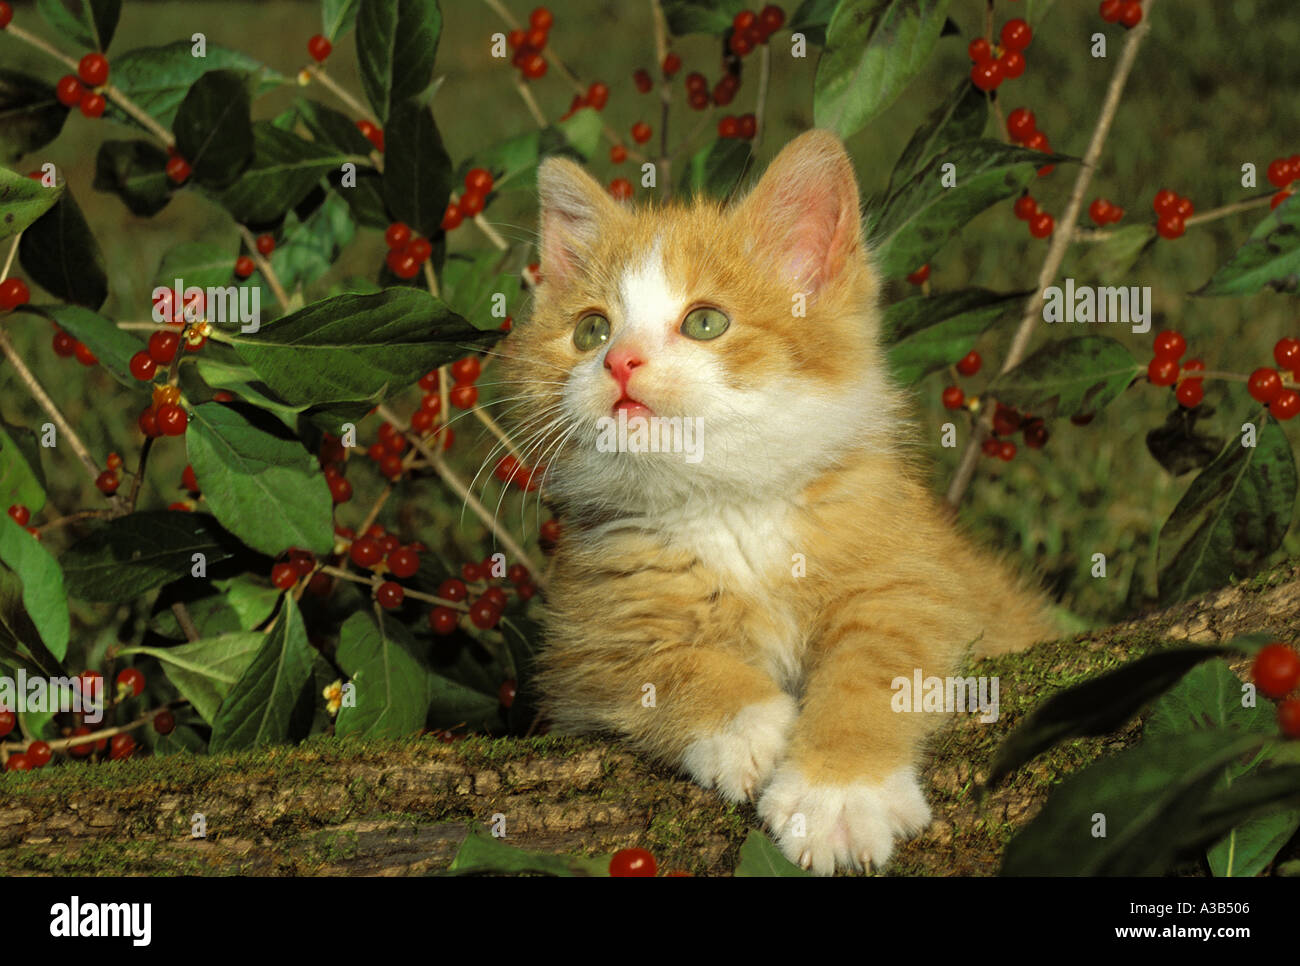 Yellow and white tabby kitten sitting in holly bush with red berries looking expectant and innocent in the garden, Missouri USA Stock Photo